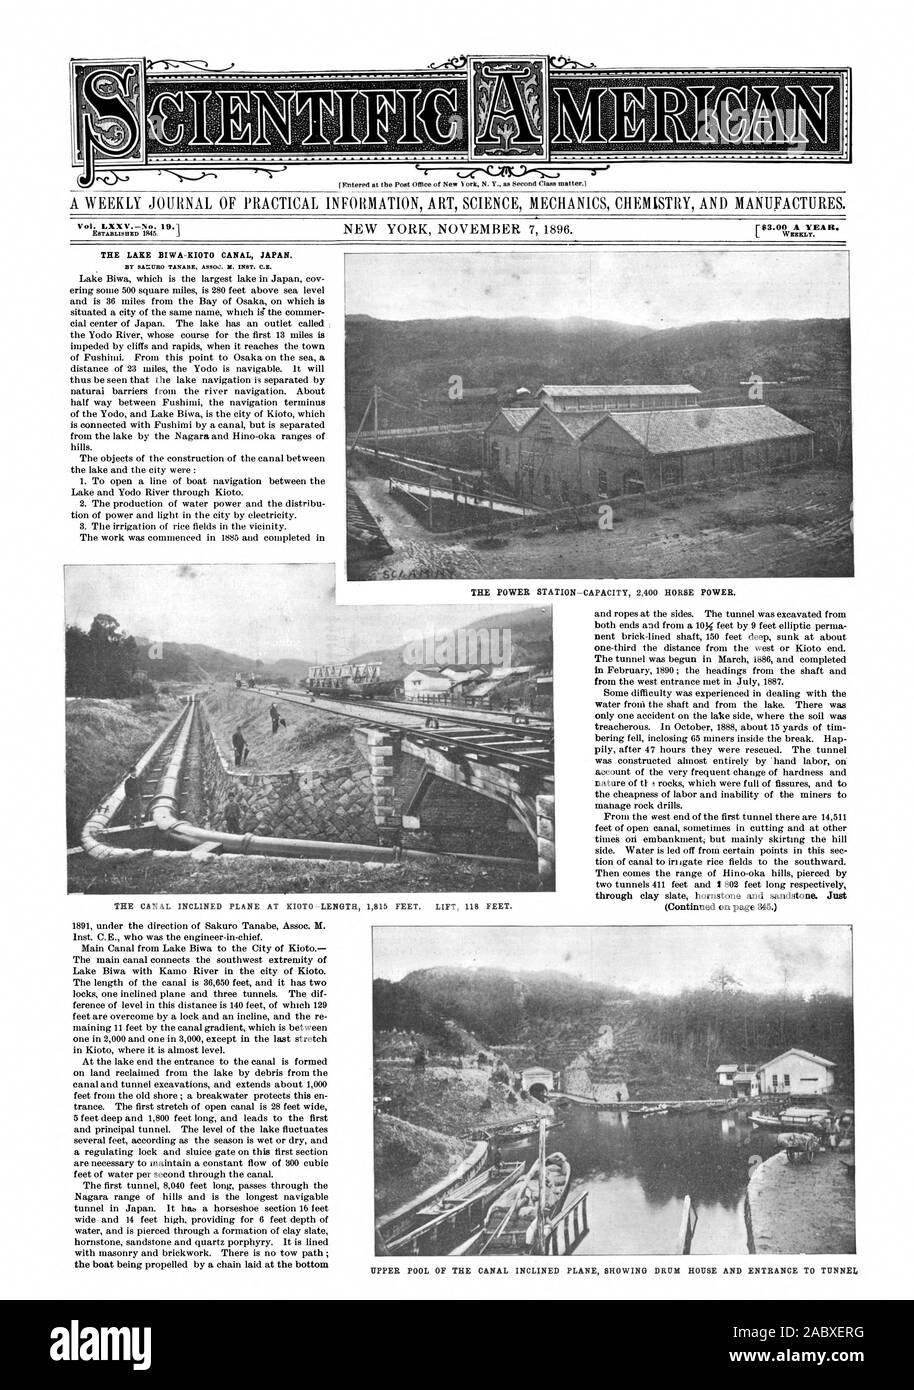 A WEEKLY JOURNAL OF PRACTICAL INFORMATION ART SCIENCE MECHANICS CHEMISTRY AND MANUFACTURES. Vol. LXXVNo. 19.1 ESTABLISHED 1845. WEEKLY. iftntered at the Post Office of New %tot N. Y as Second (lass tnatter.1 THE POWER STATION—CAPACITY 2400 HORSE POWER. THE LAKE BIWA-KIOTO CANAL JAPAN. THE CANAL INCLINED PLANE AT KIOTO LENGTH 1815 FEET. LIFT 8 FEET. through clay slate hornstone and sandstone. Just (Continued on page 345.) UPPER POOL OF THE CANAL INCLINED PLANE SHOWING DRUM HOUSE AND ENTRANCE TO TUNNEL, scientific american, 1896-11-07 Stock Photo